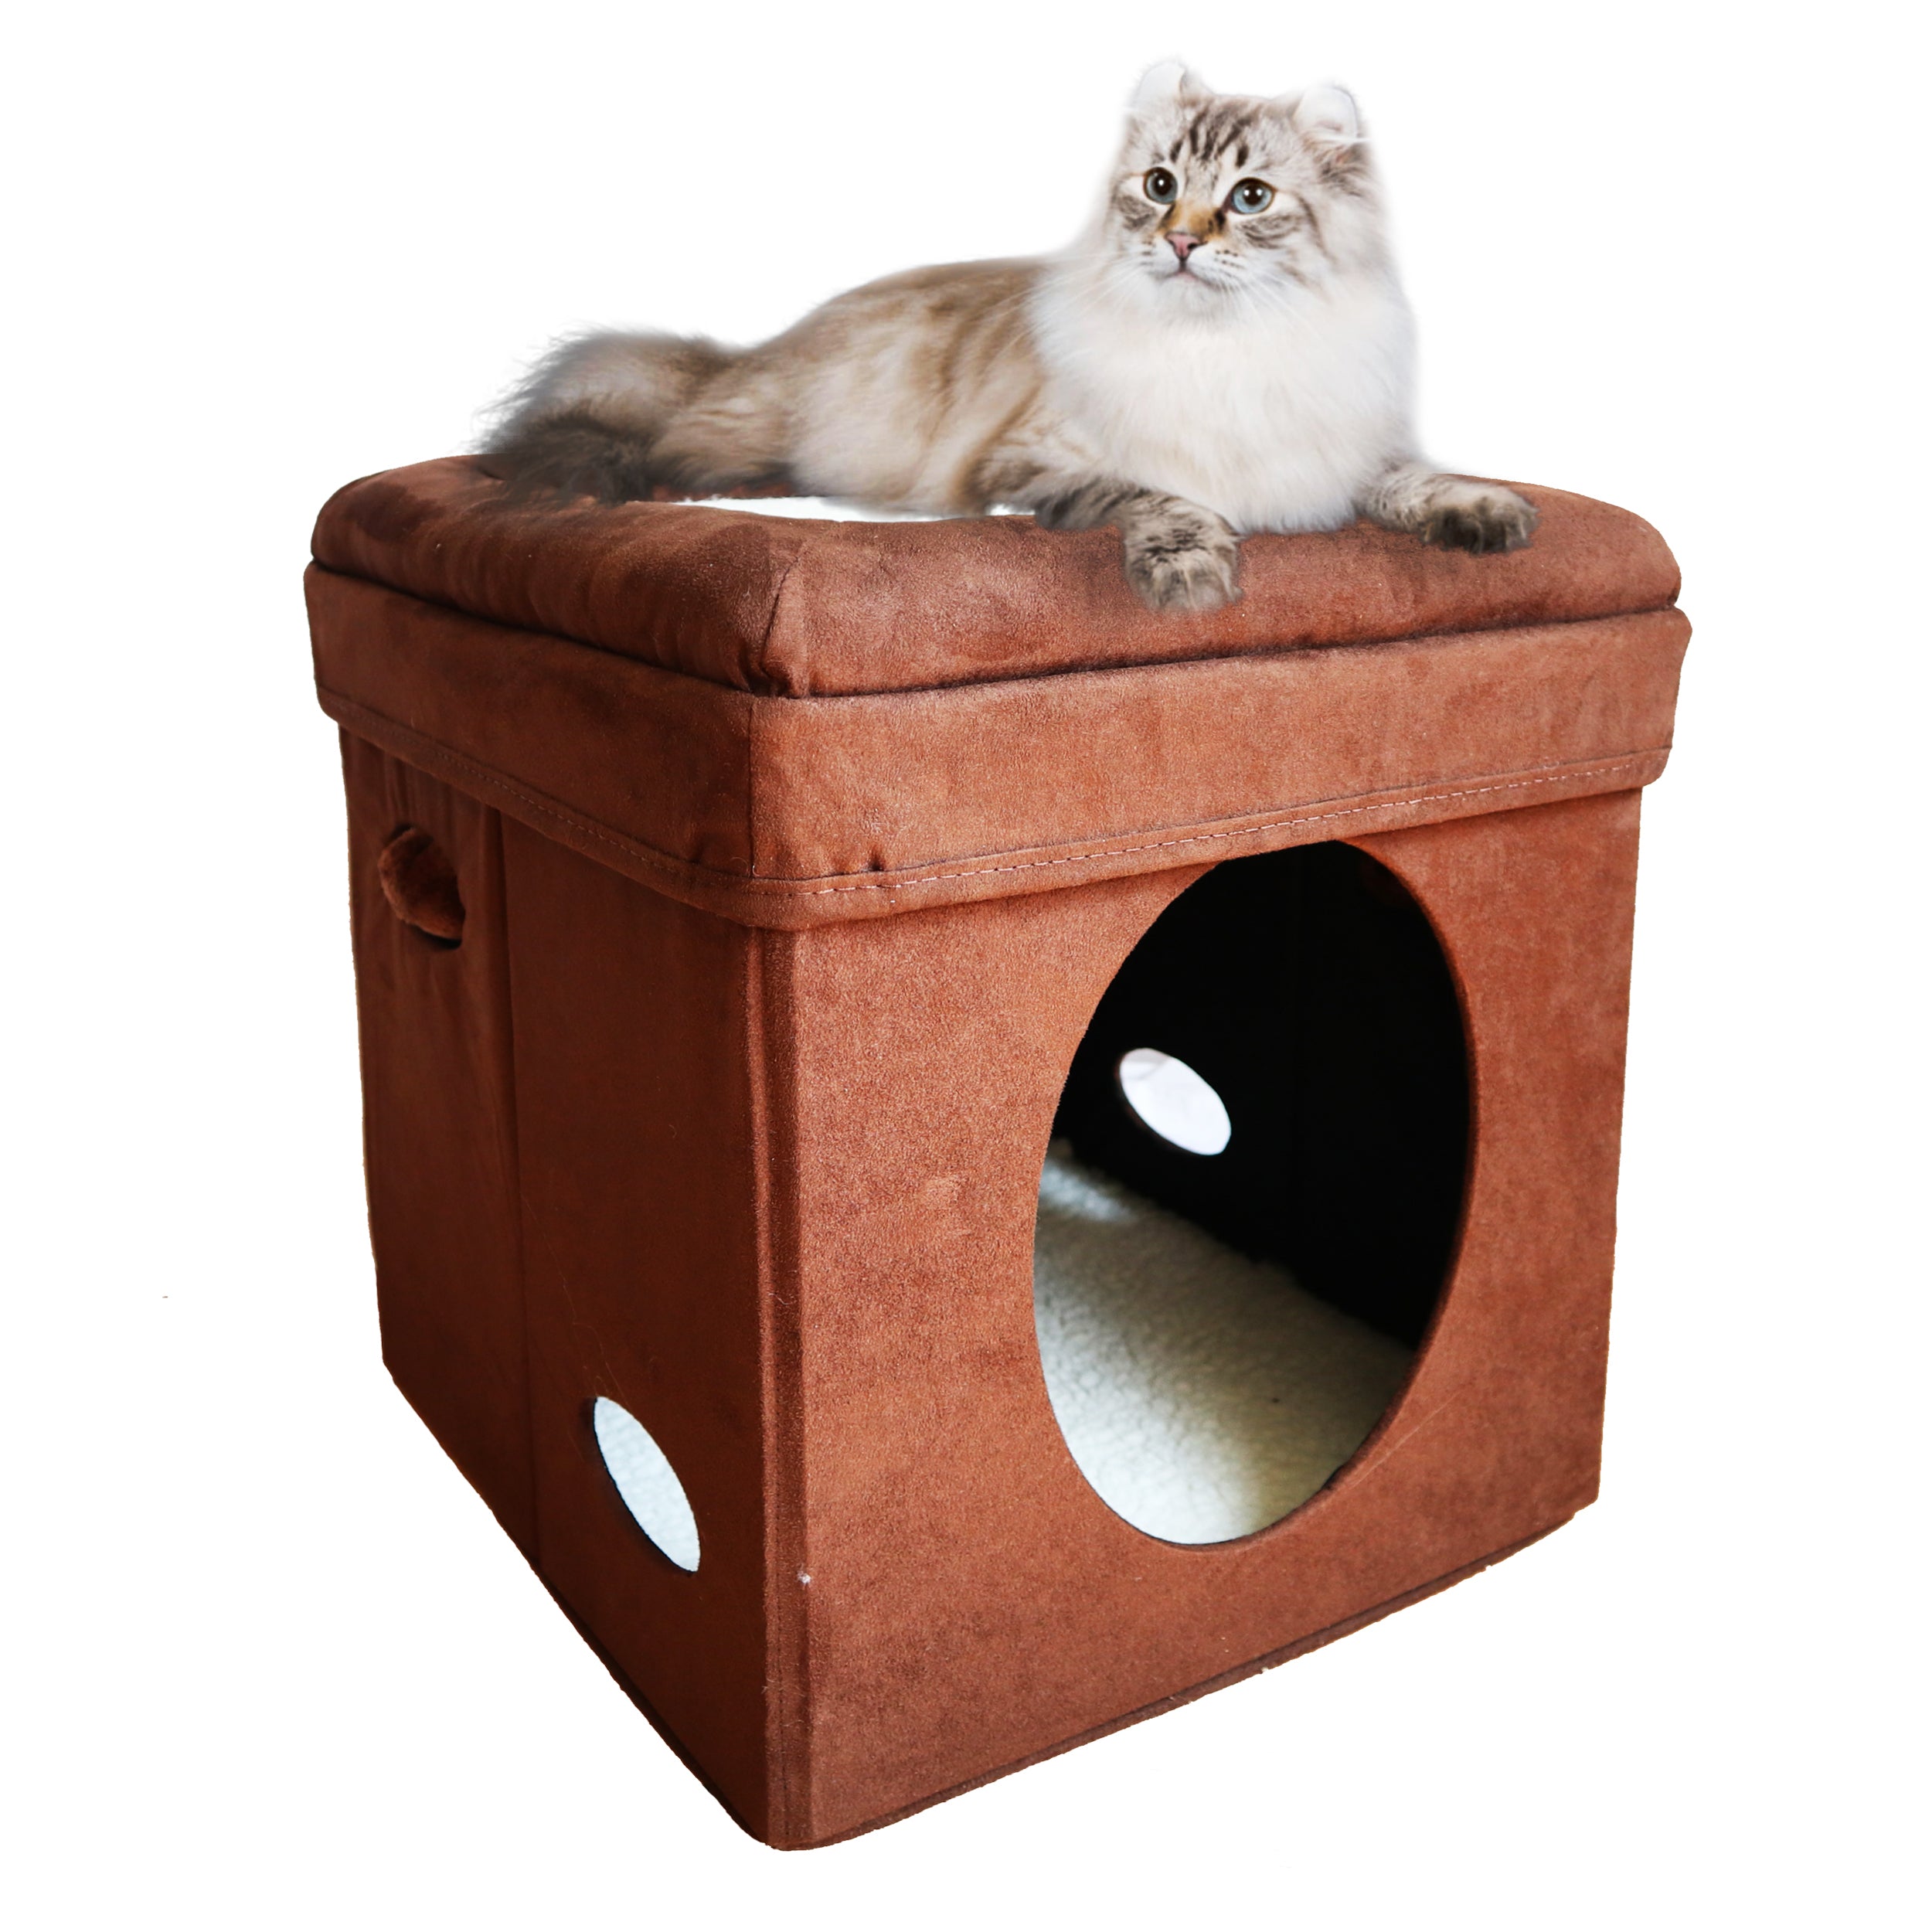 [Cat Bed] Feline Nuvo Midwest Curious Cat Cube Interactive Play Box